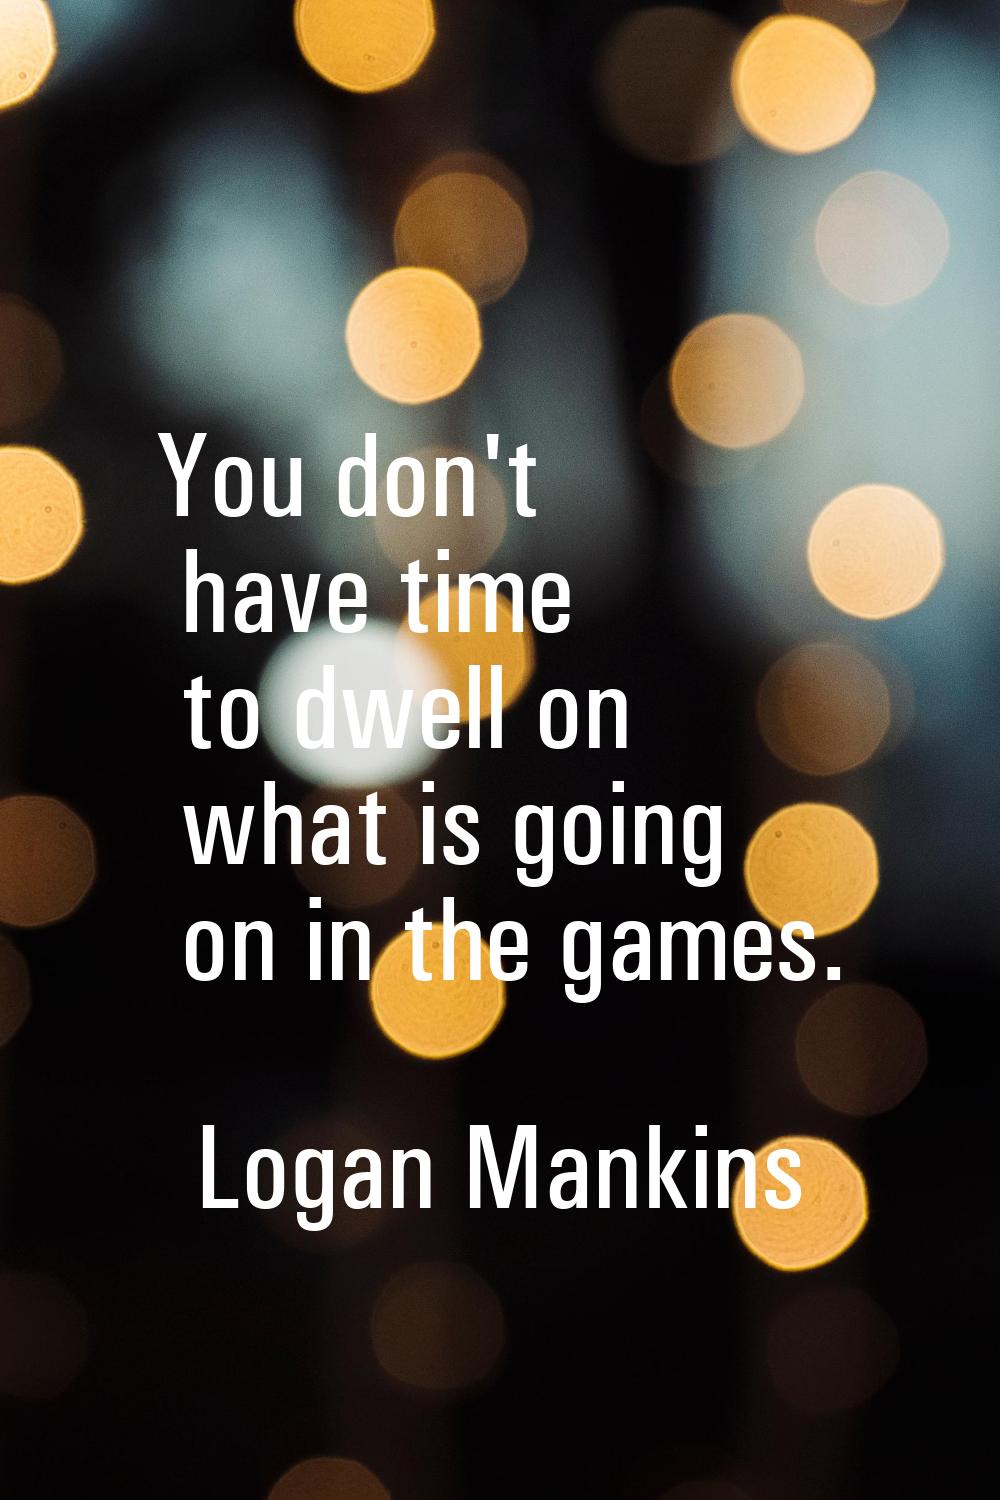 You don't have time to dwell on what is going on in the games.